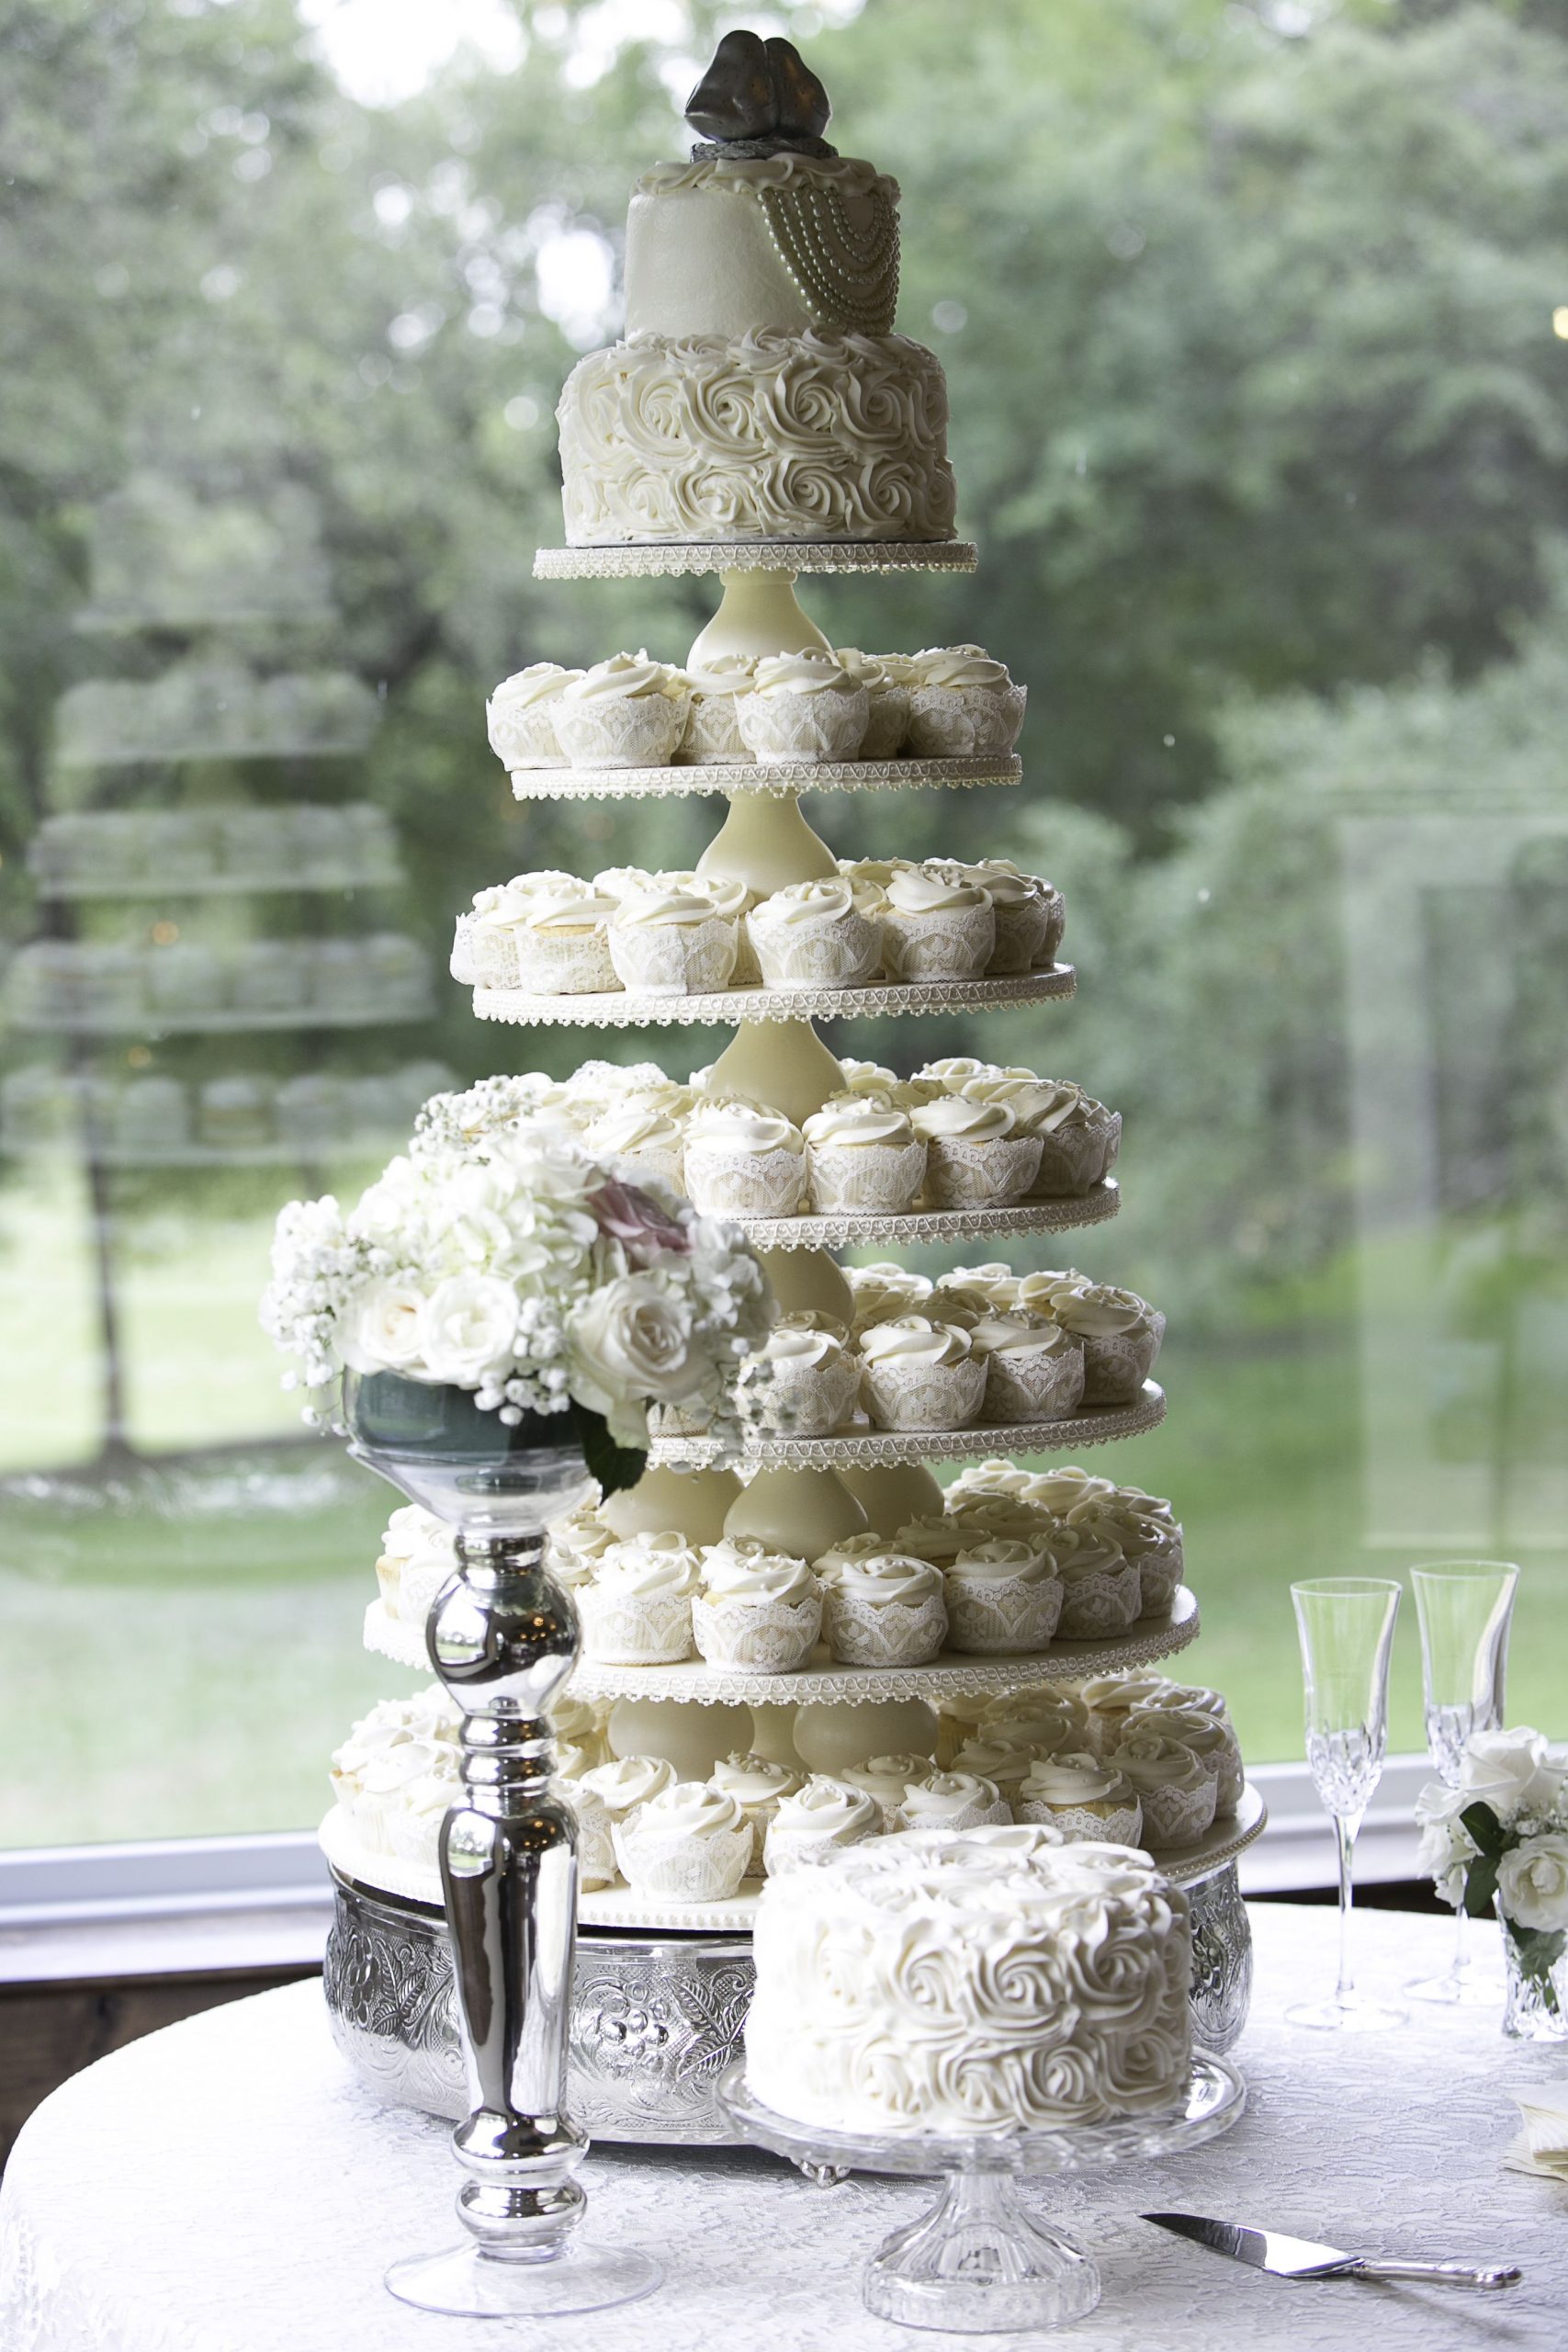 Wedding cupcake stand with lace and pearl trim and small cake on top ...